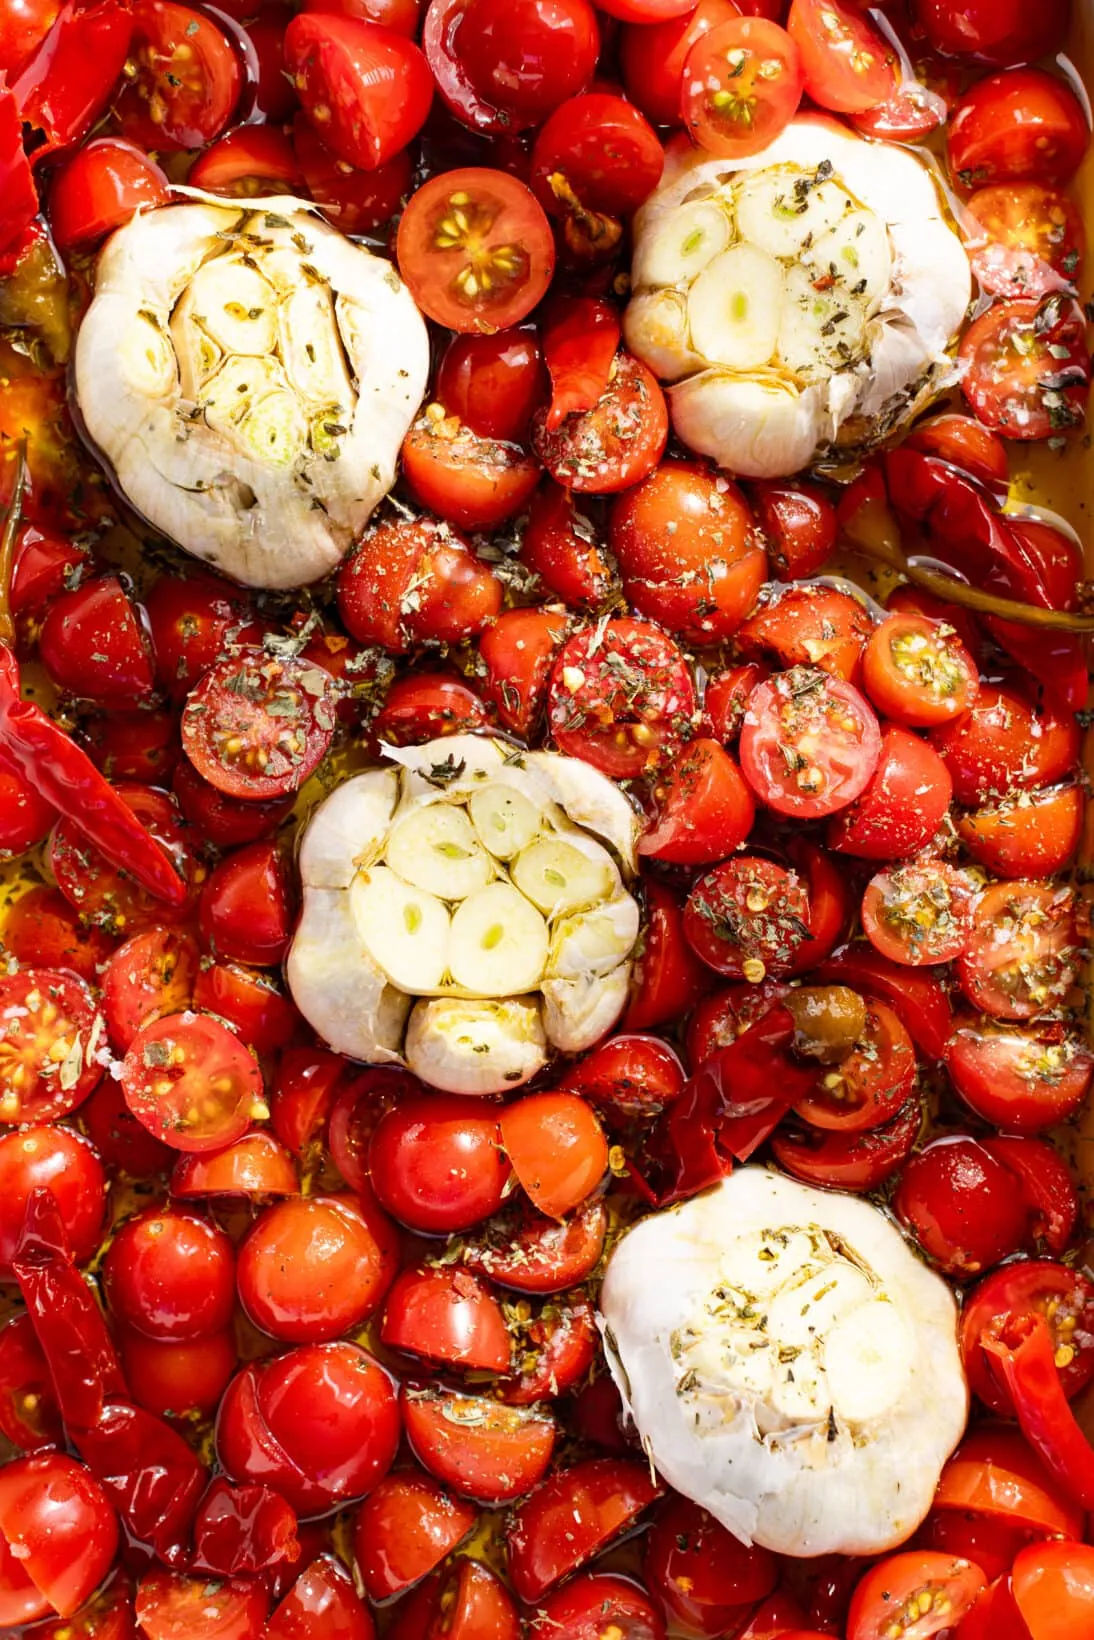 tomatoes, chilies, and heads of garlic in olive oil and dried herbs